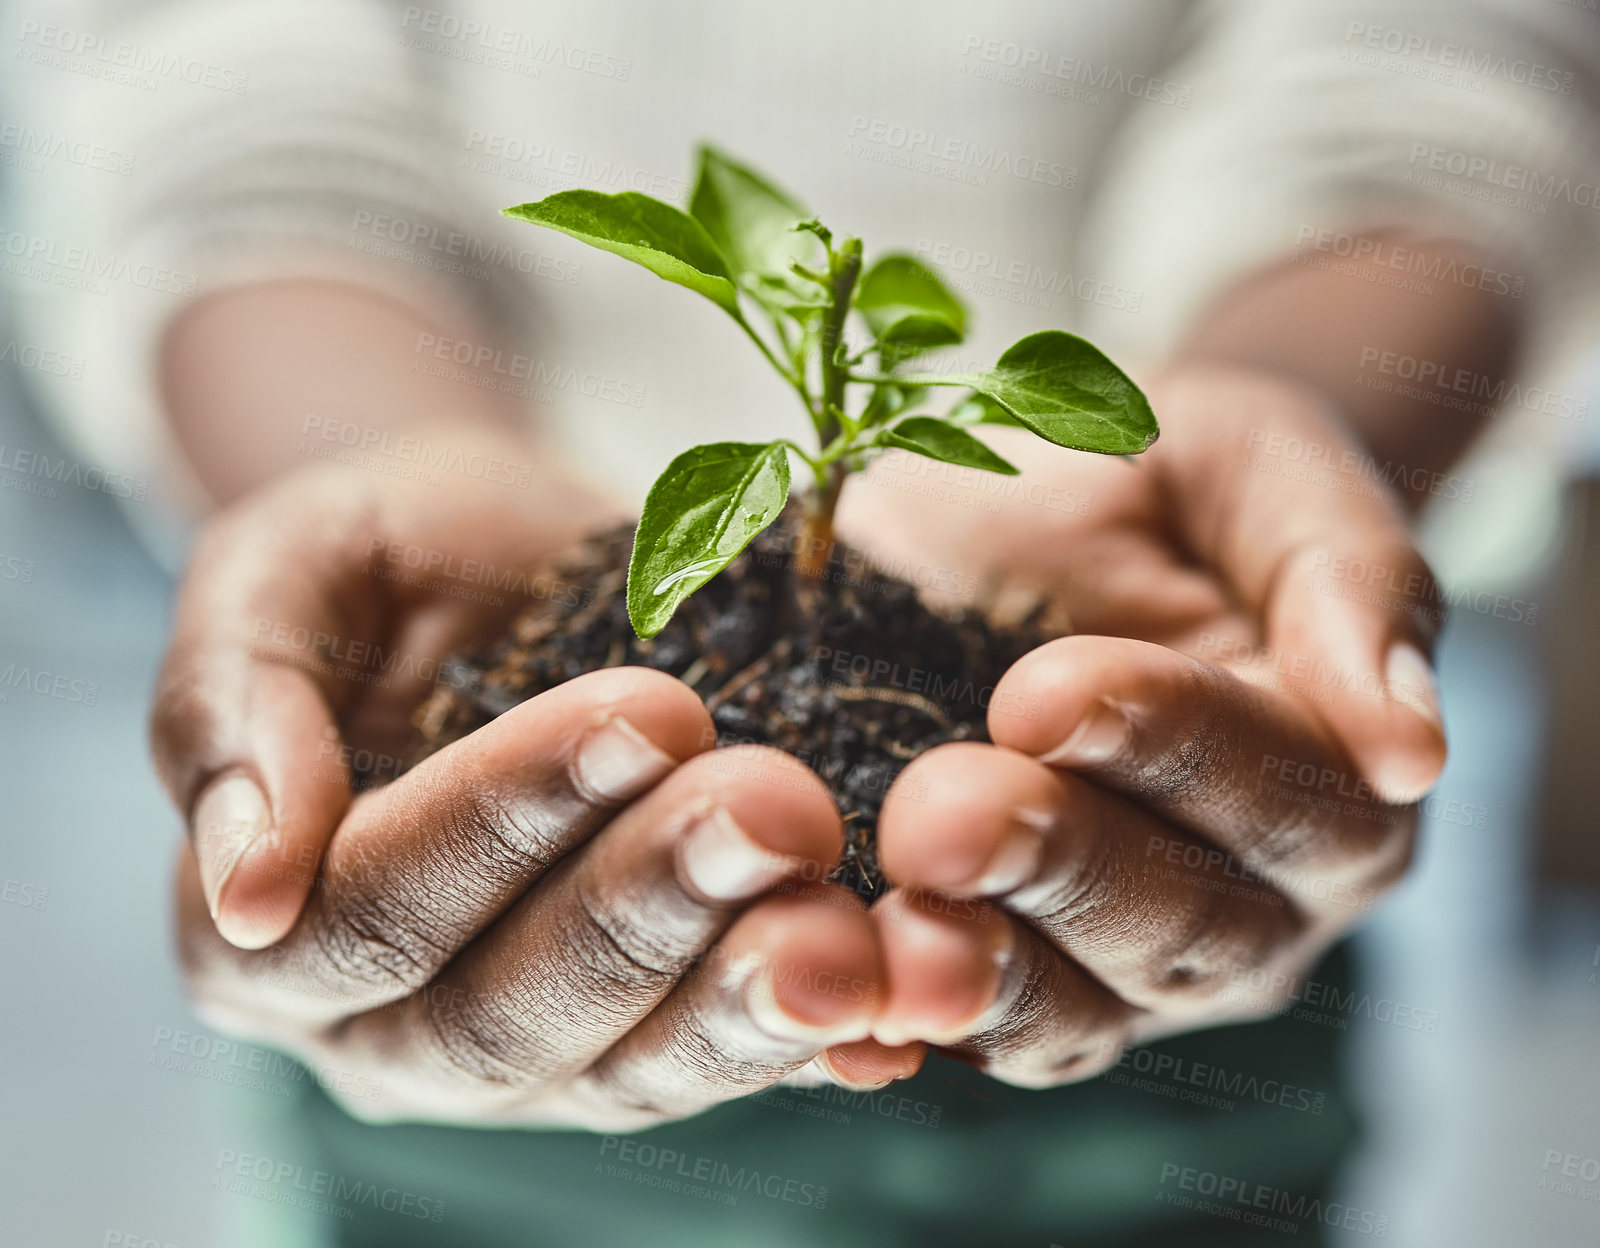 Buy stock photo Cropped shot of an unrecognizable woman holding a plant growing out of soil